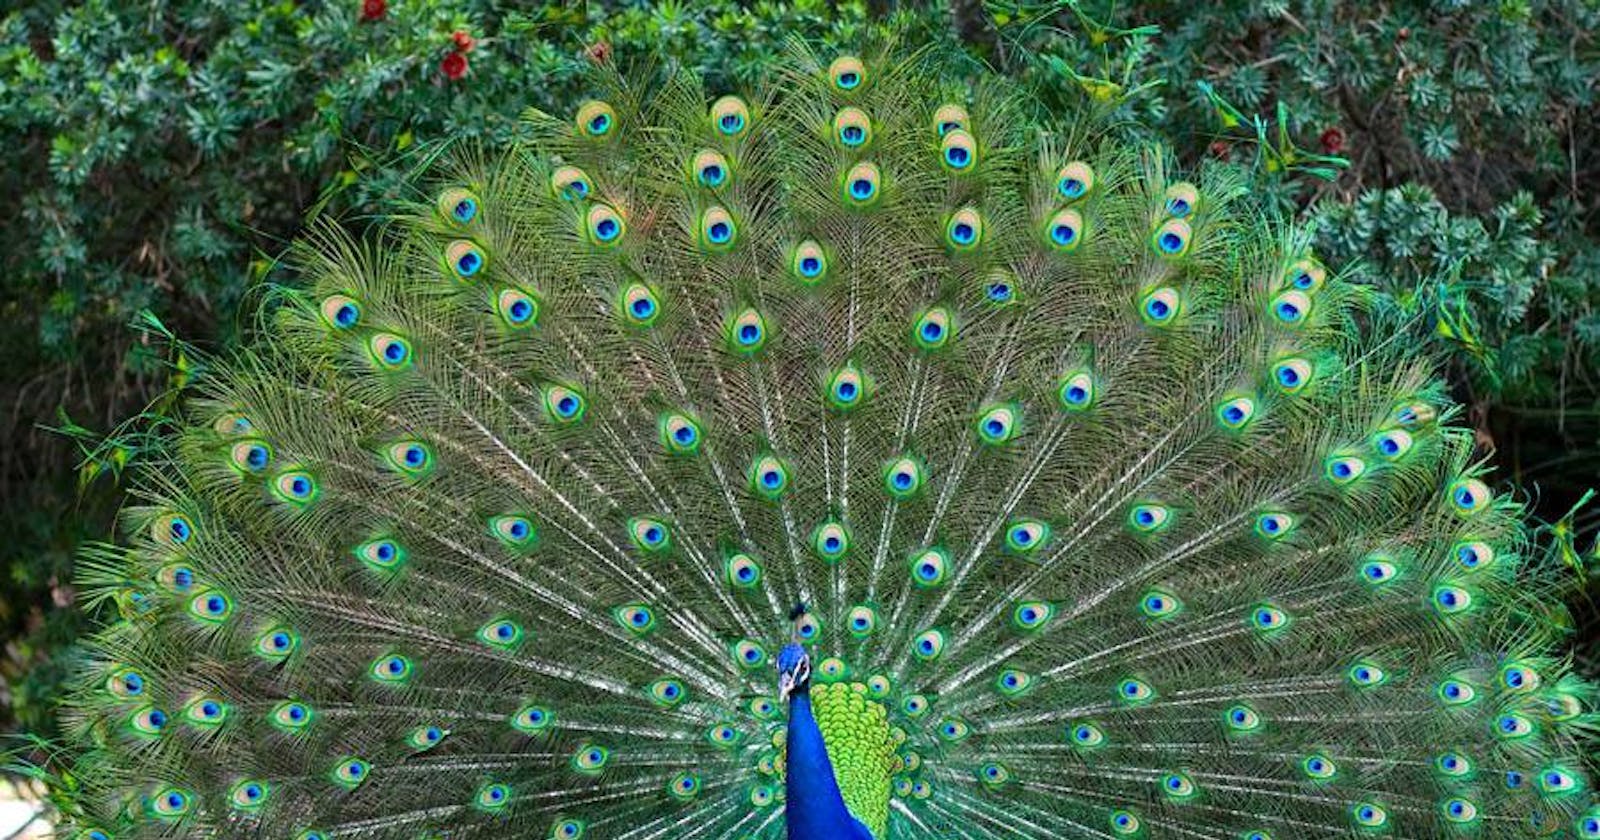 Peafowl career or how act as if